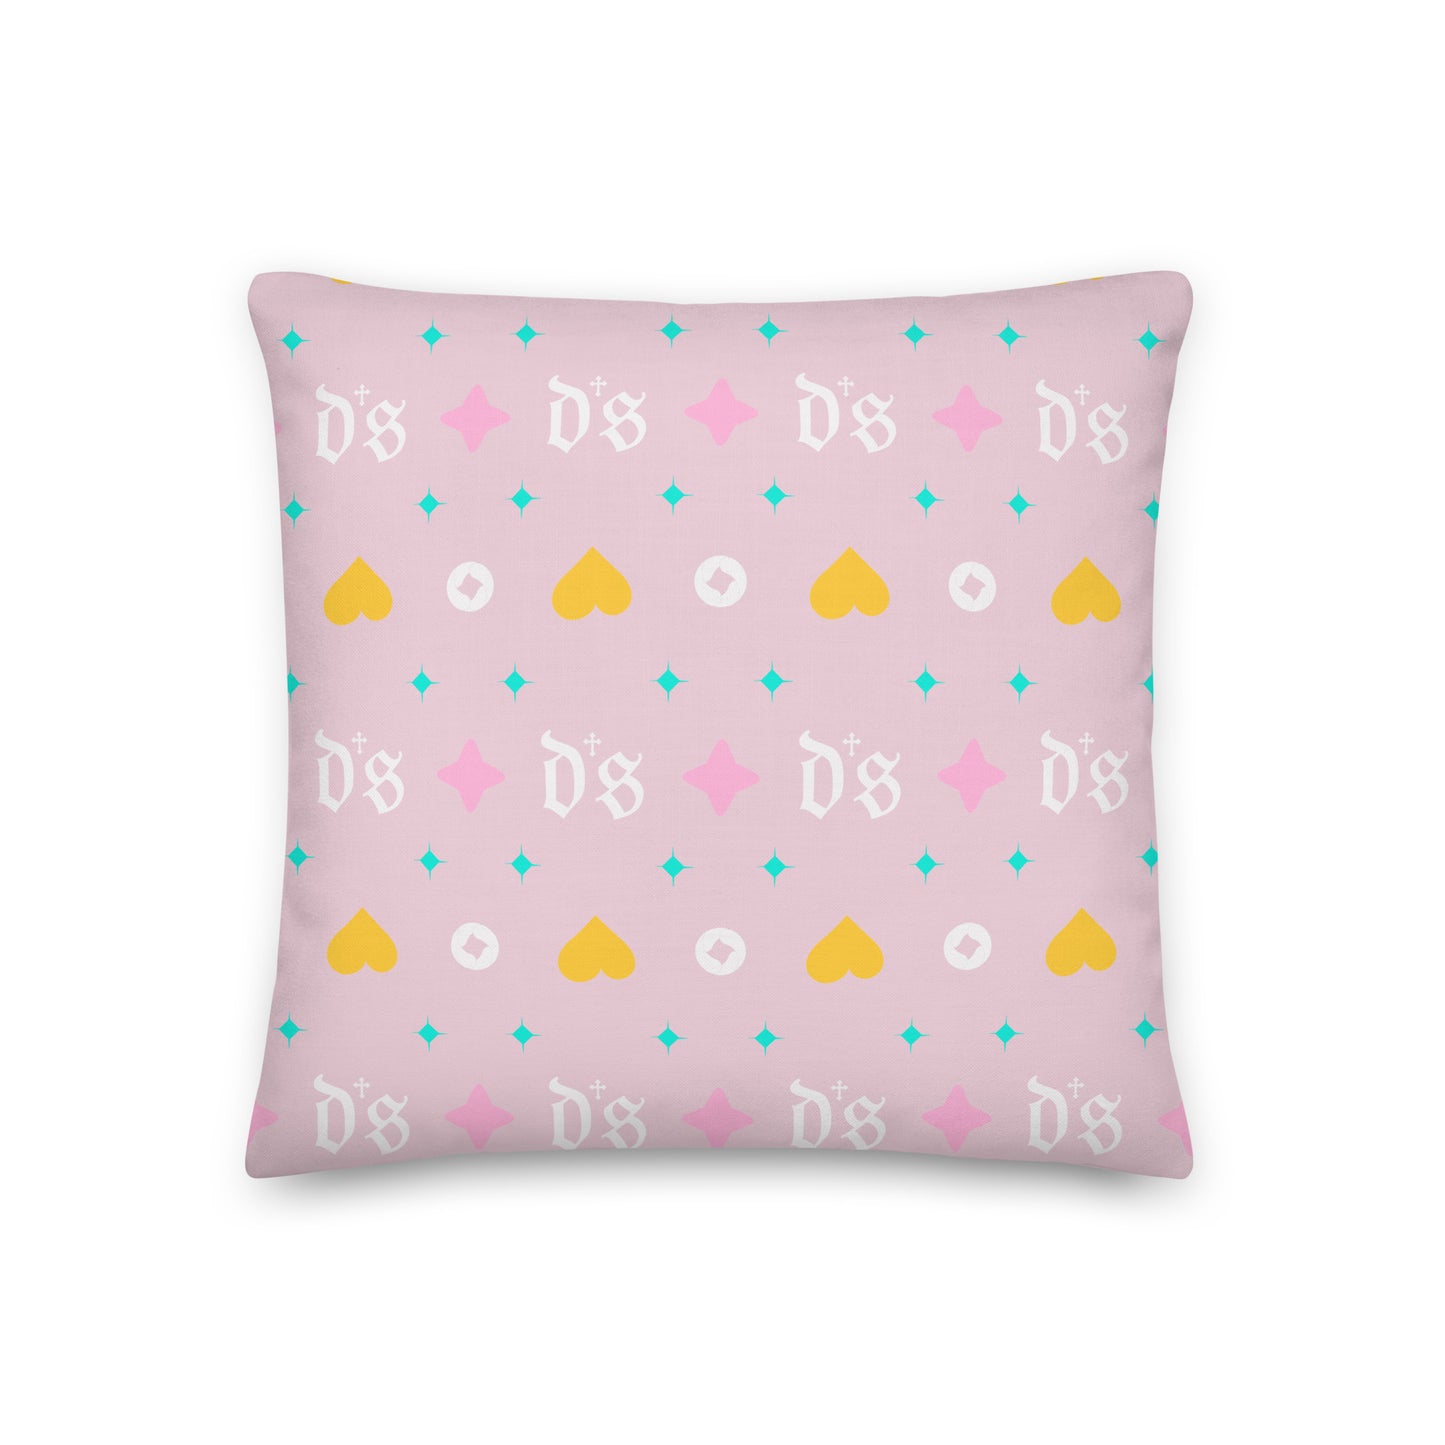 All Over You -DS Island Kings Premium Pillow Light Pink